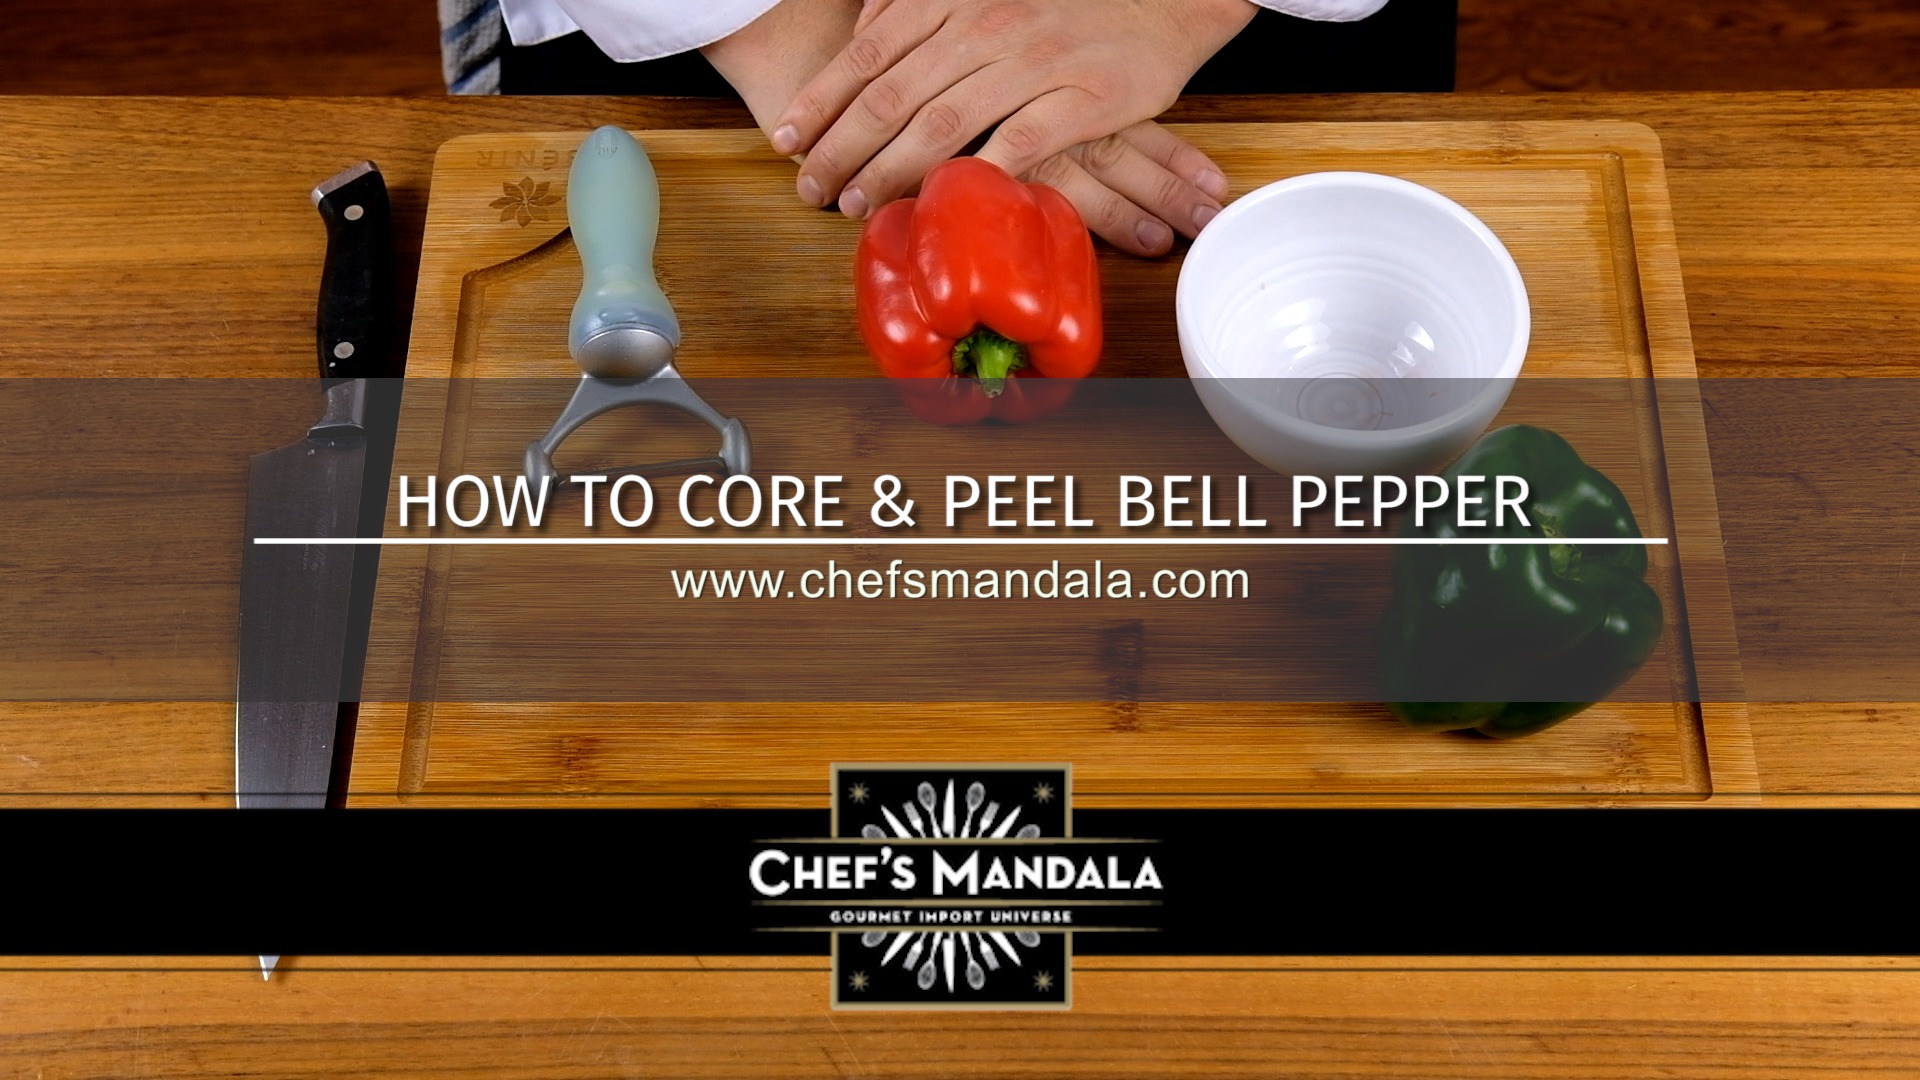 HOW TO CORE & PEEL BELL PEPPER